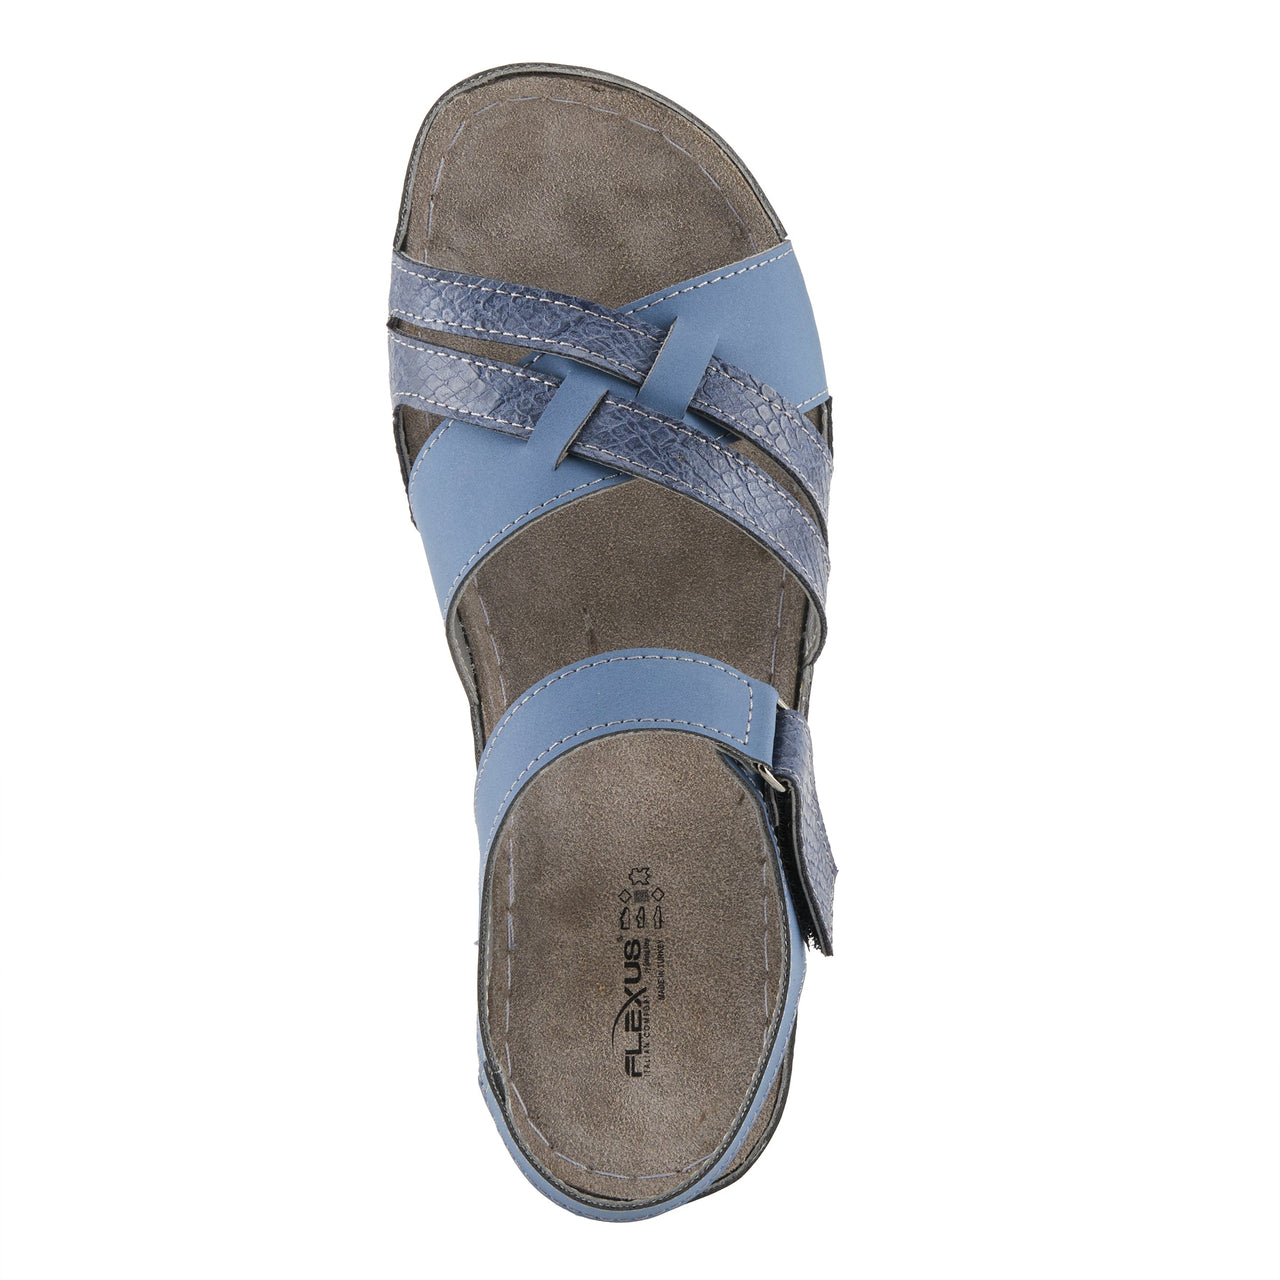 Spring Step Shoes Flexus Alvina Sandals - Side View with anti-shock technology